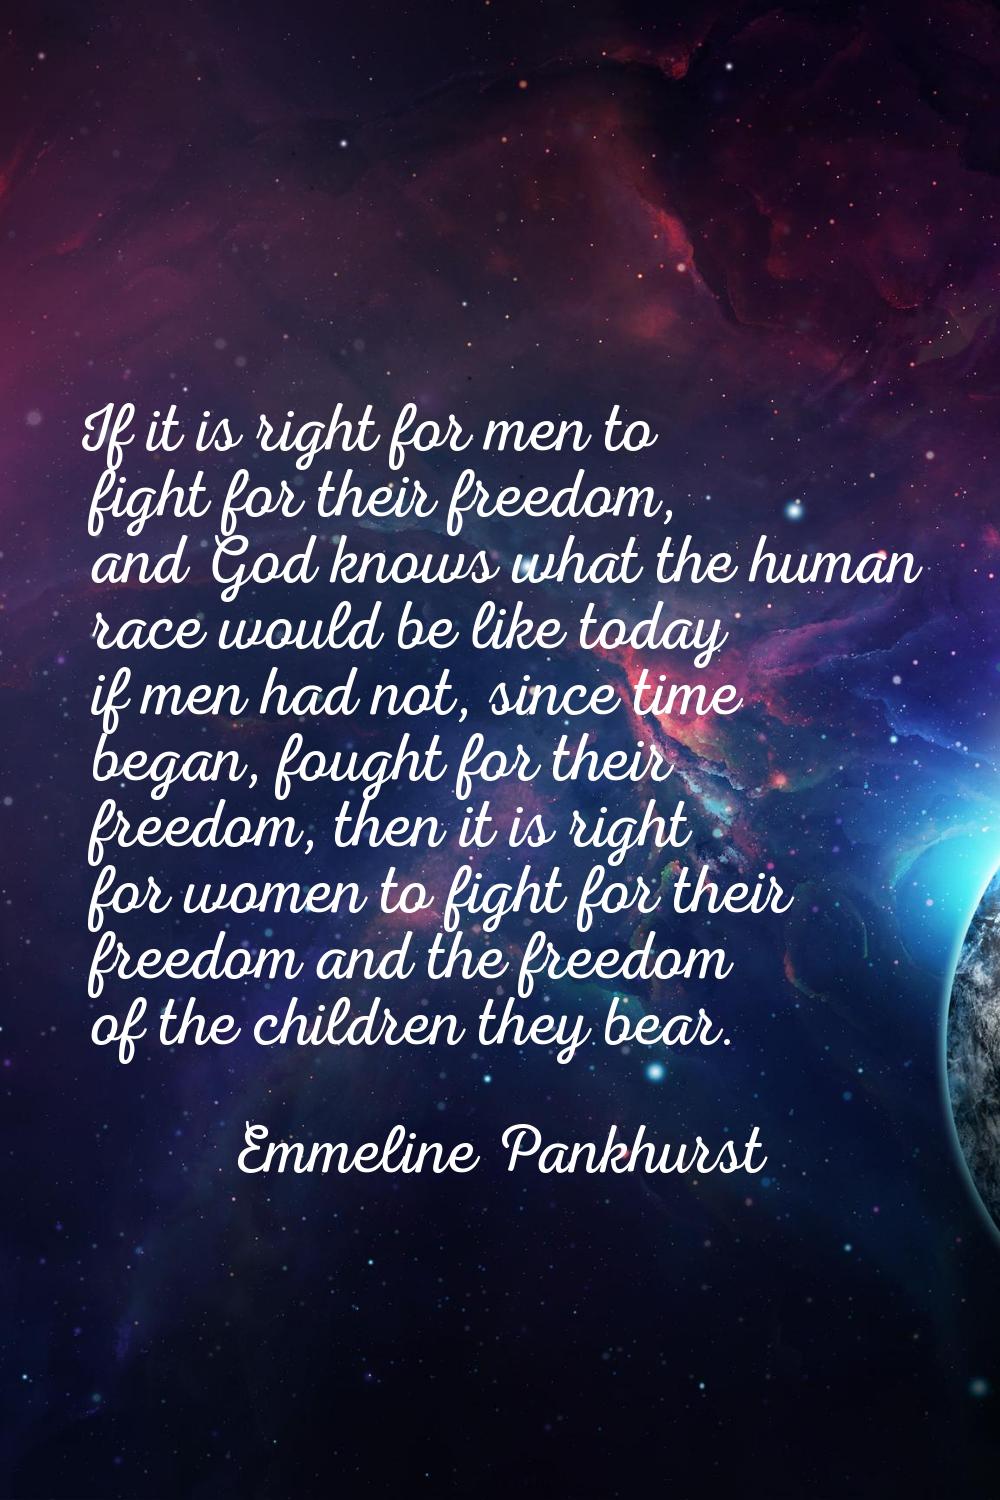 If it is right for men to fight for their freedom, and God knows what the human race would be like 